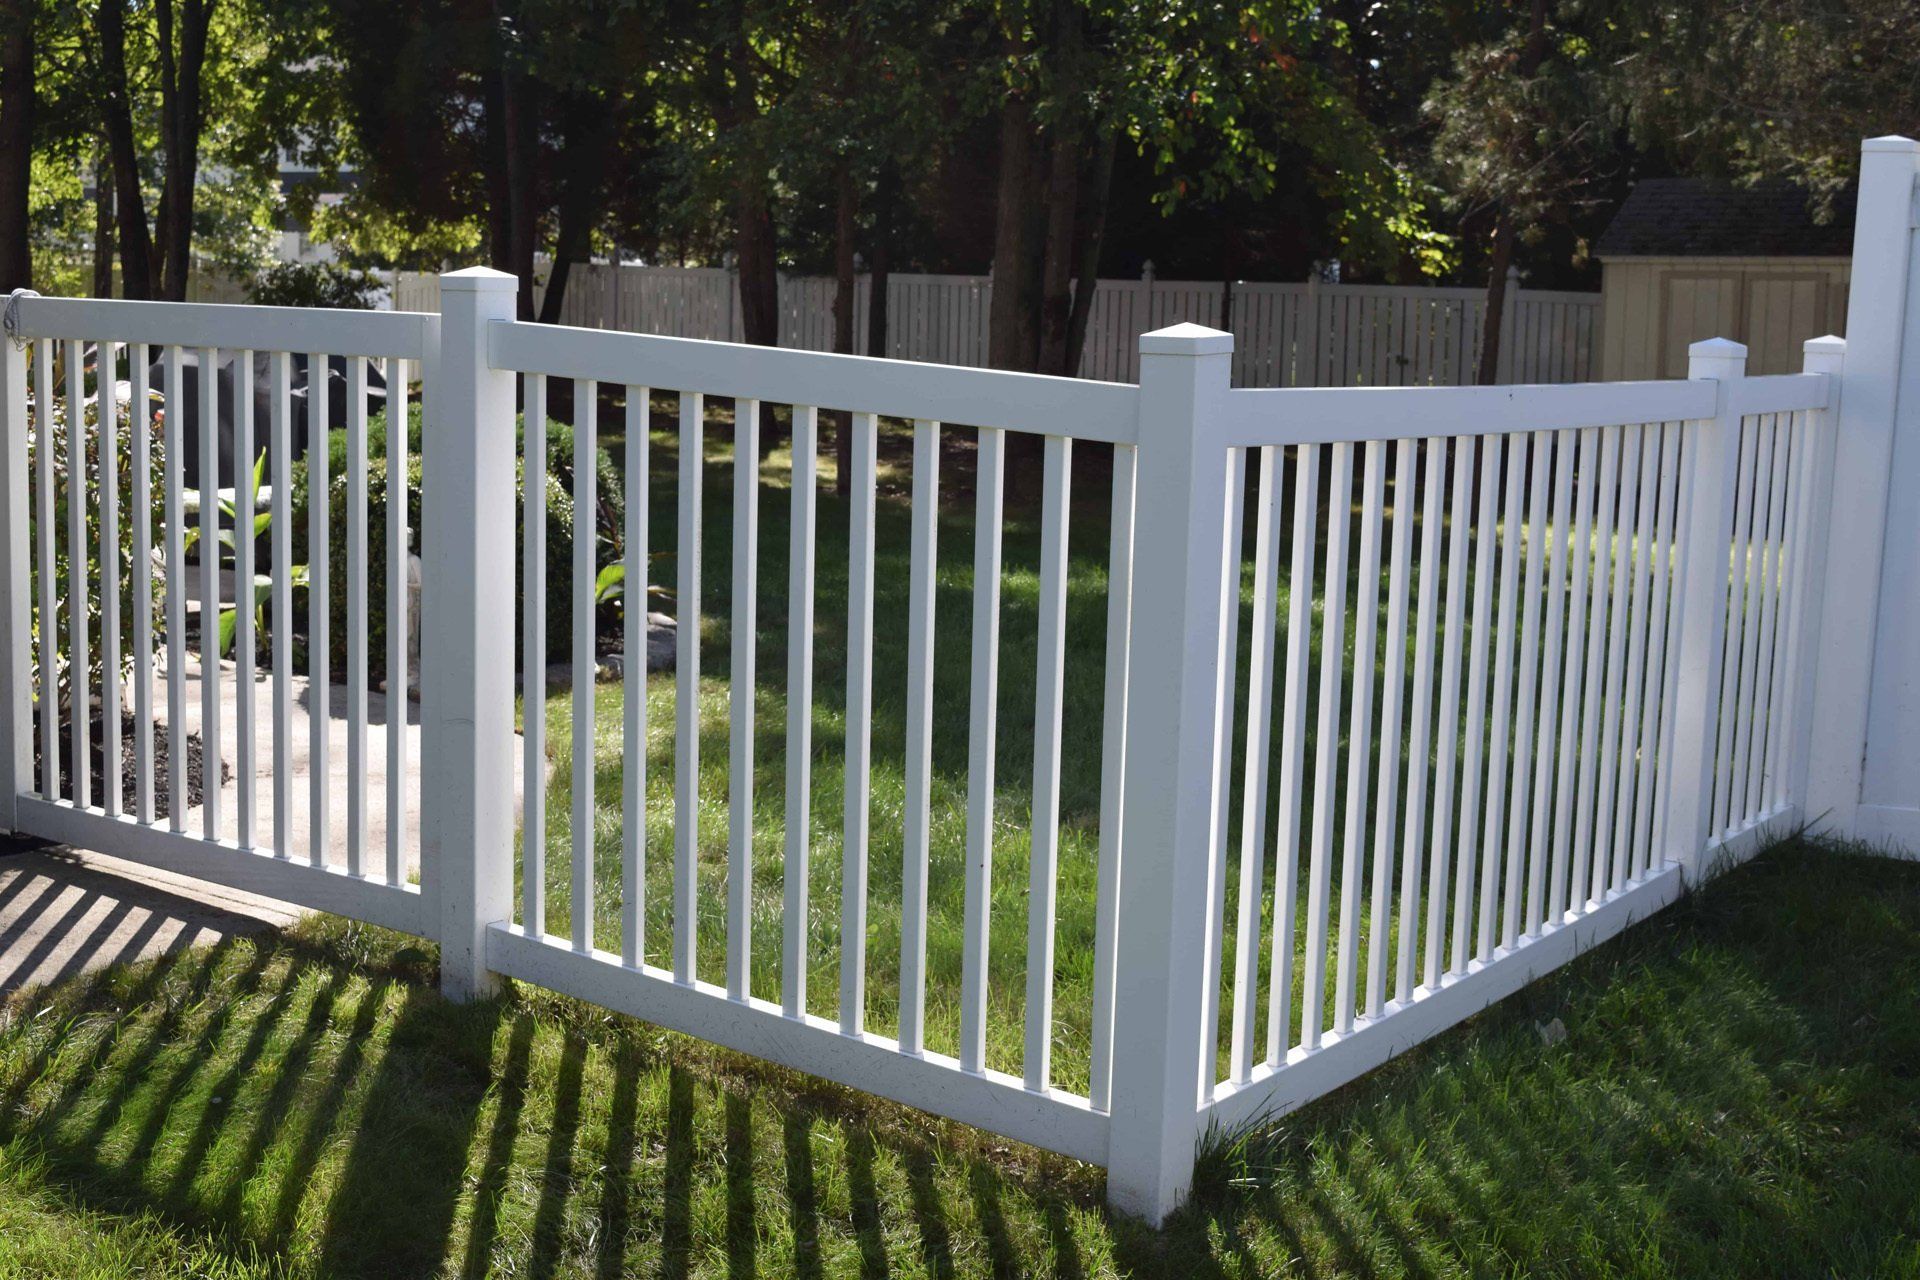 Vinyl fence is an eco-friendly solution